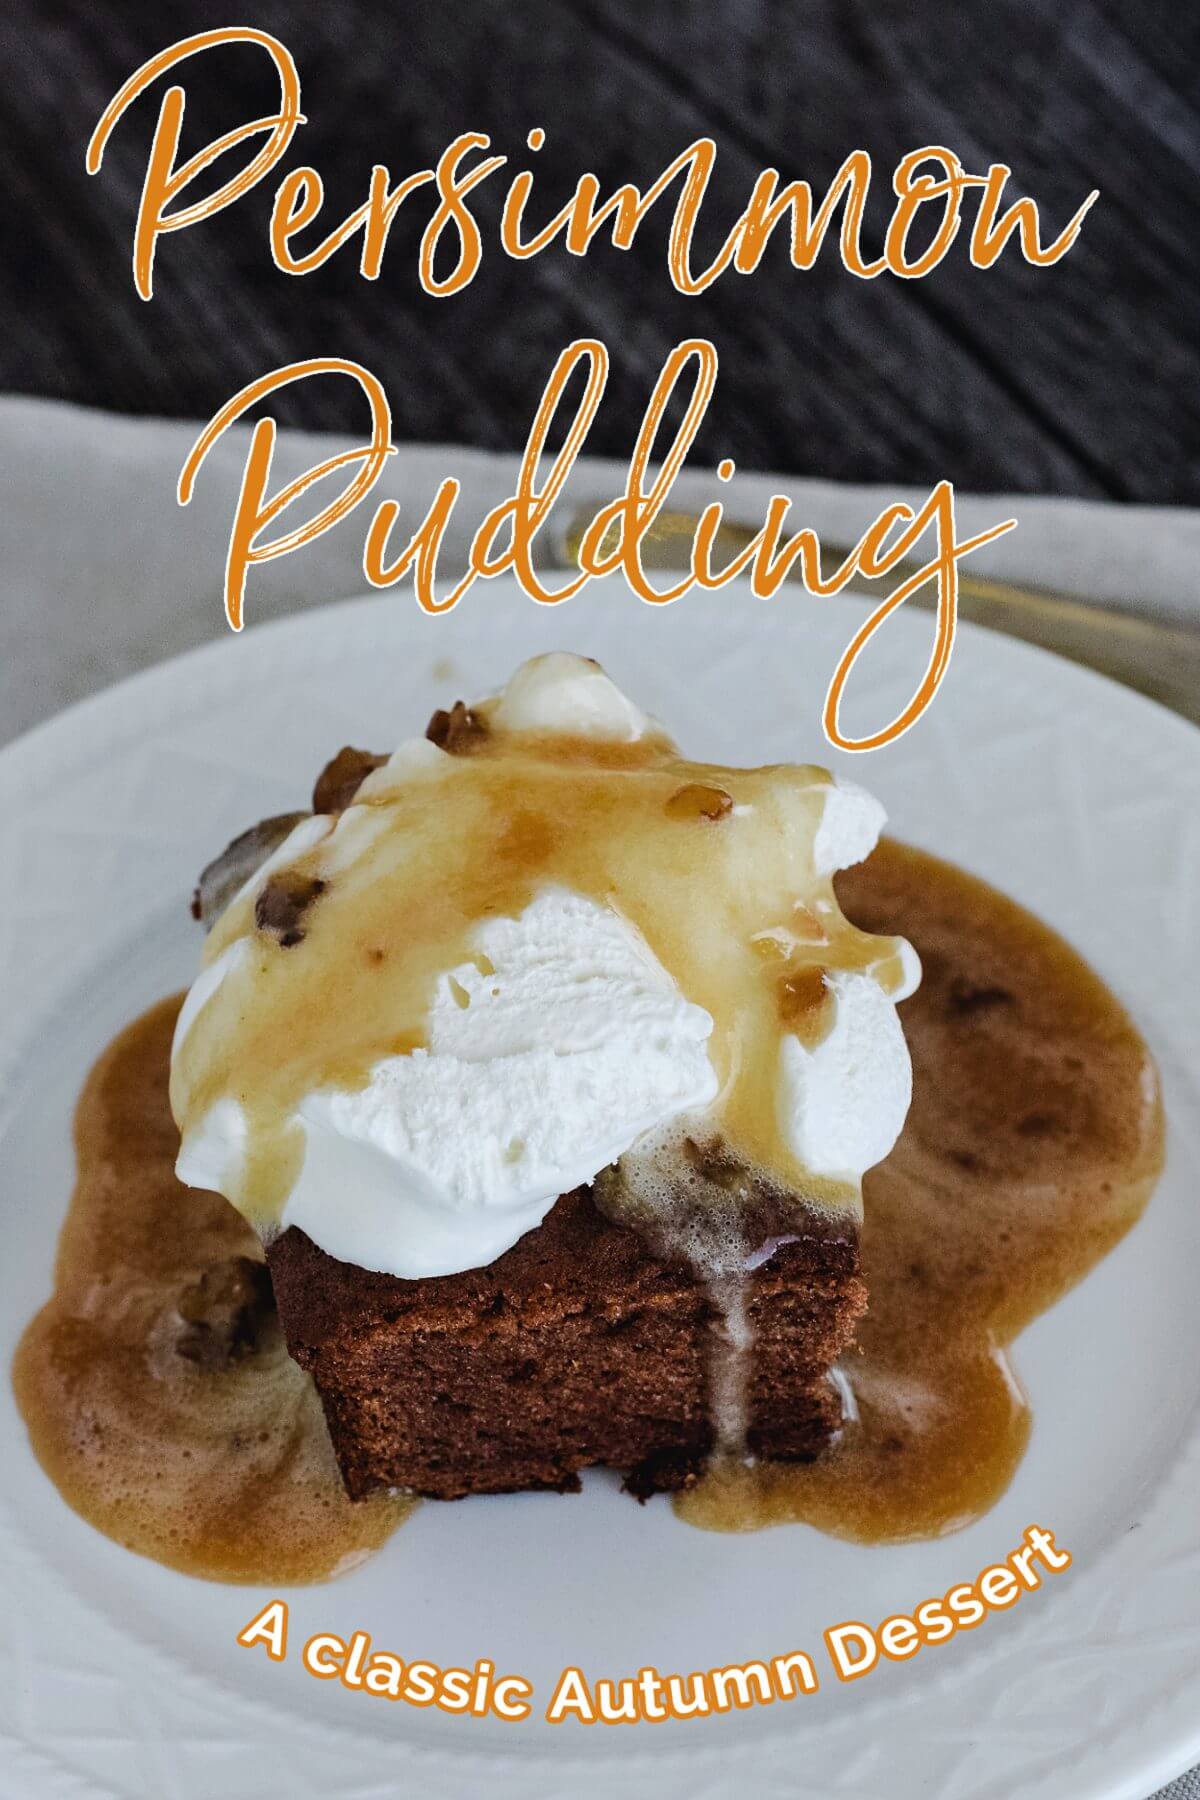 Persimmon pudding with Whipped Cream and Pecan Sauce. 